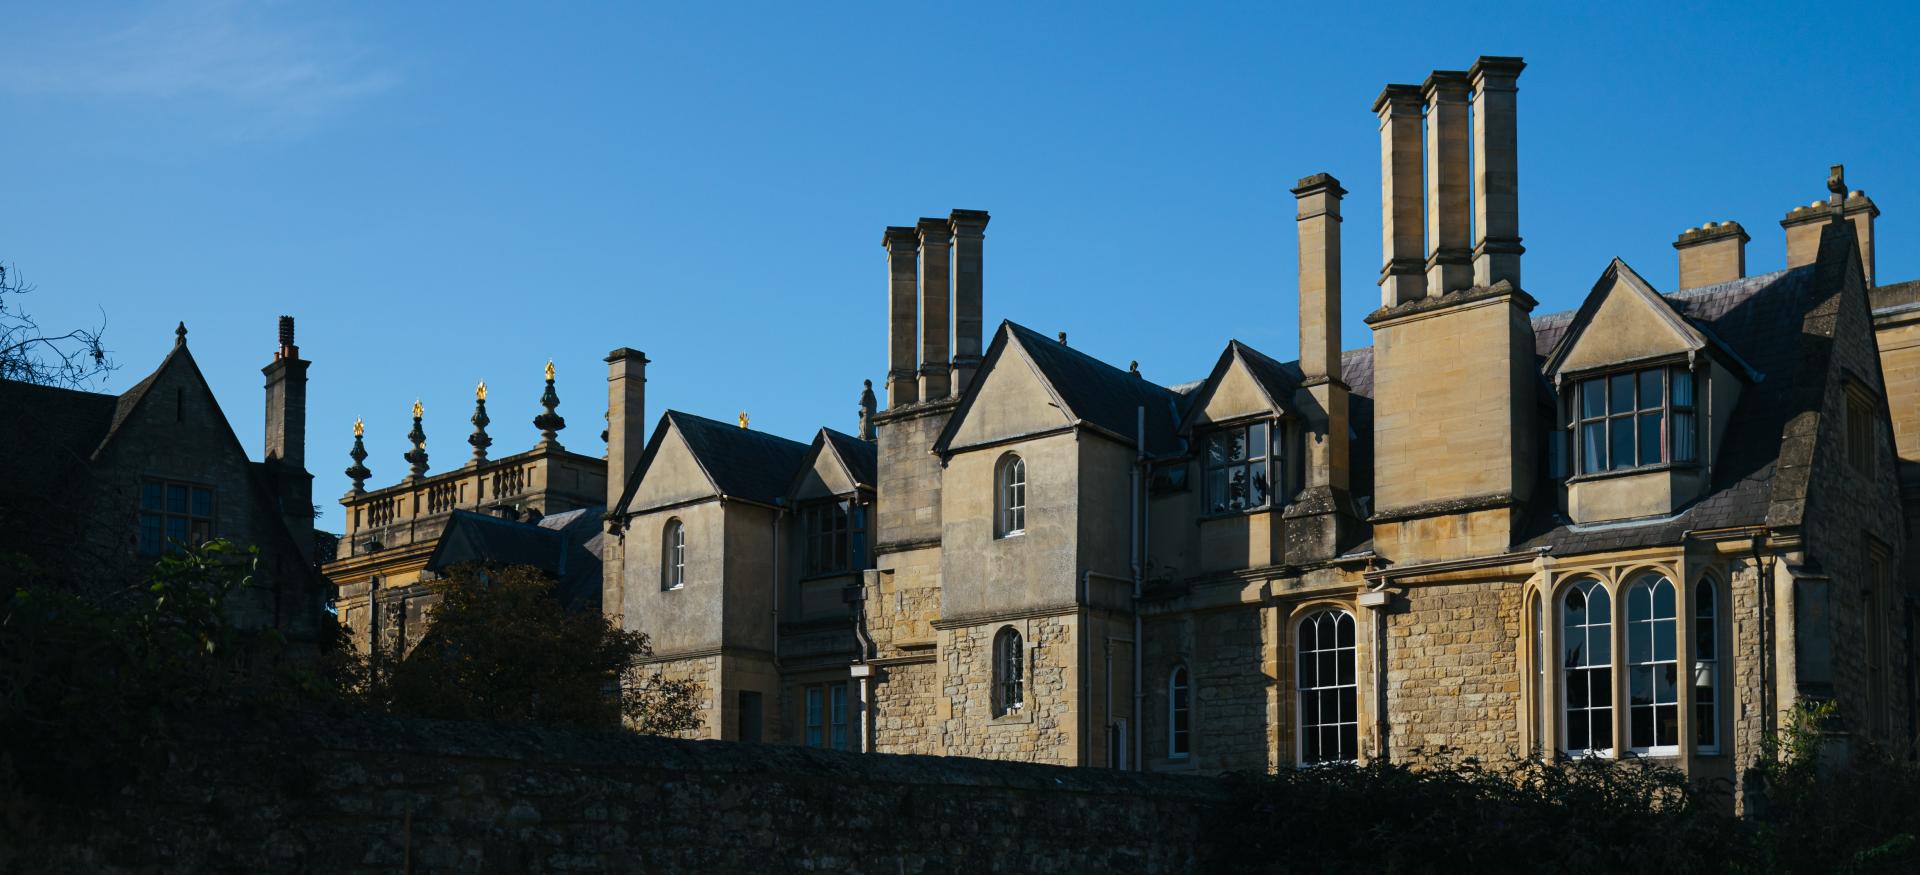 The tops of Trinity College buildings are visible against a blue sky and partially in shadow.